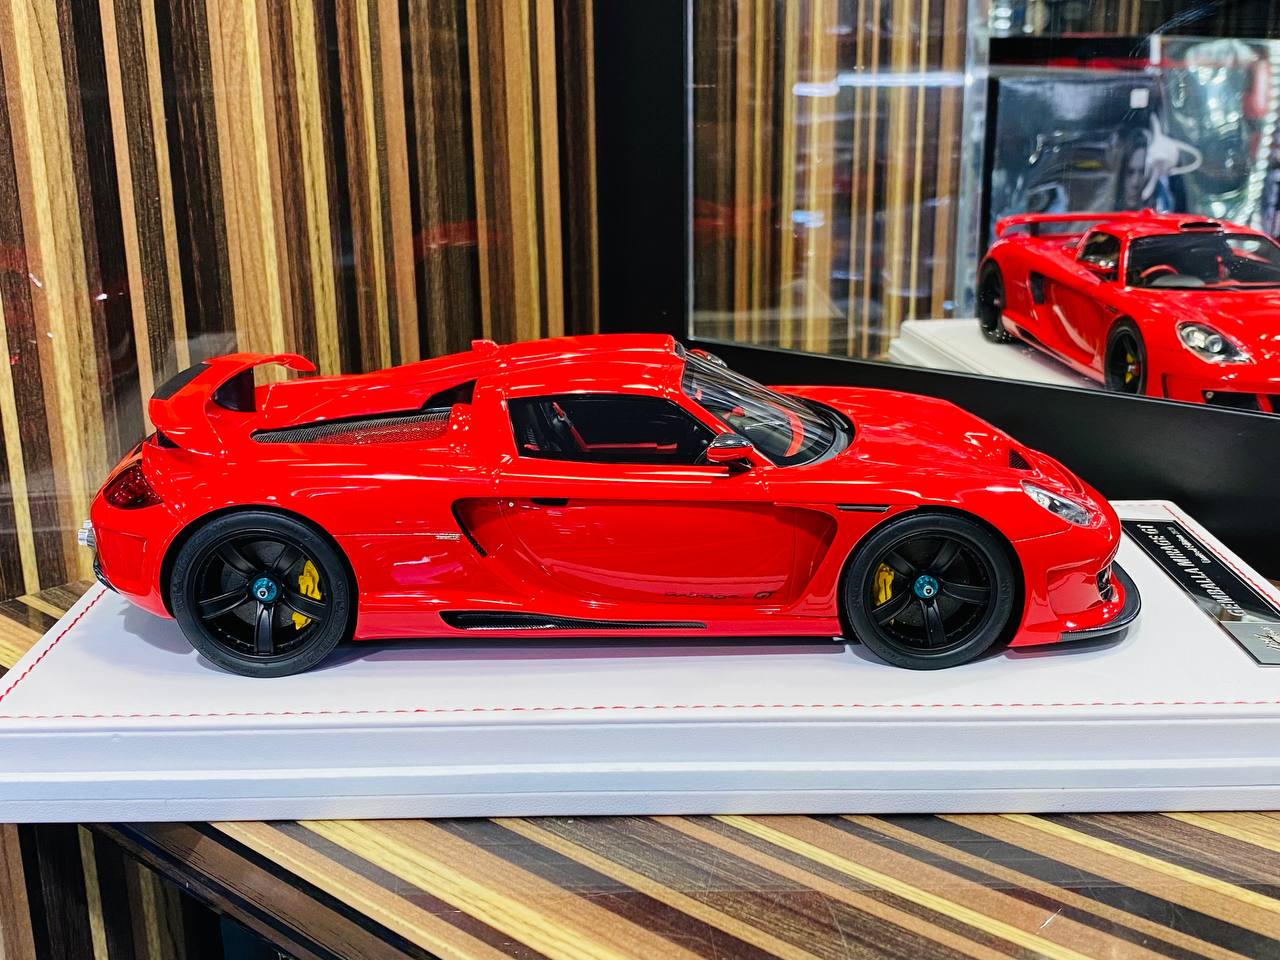 Exclusive IVY Models Gemballa MIRAGE GT Resin Model - Wicked Red | Limited Edition!